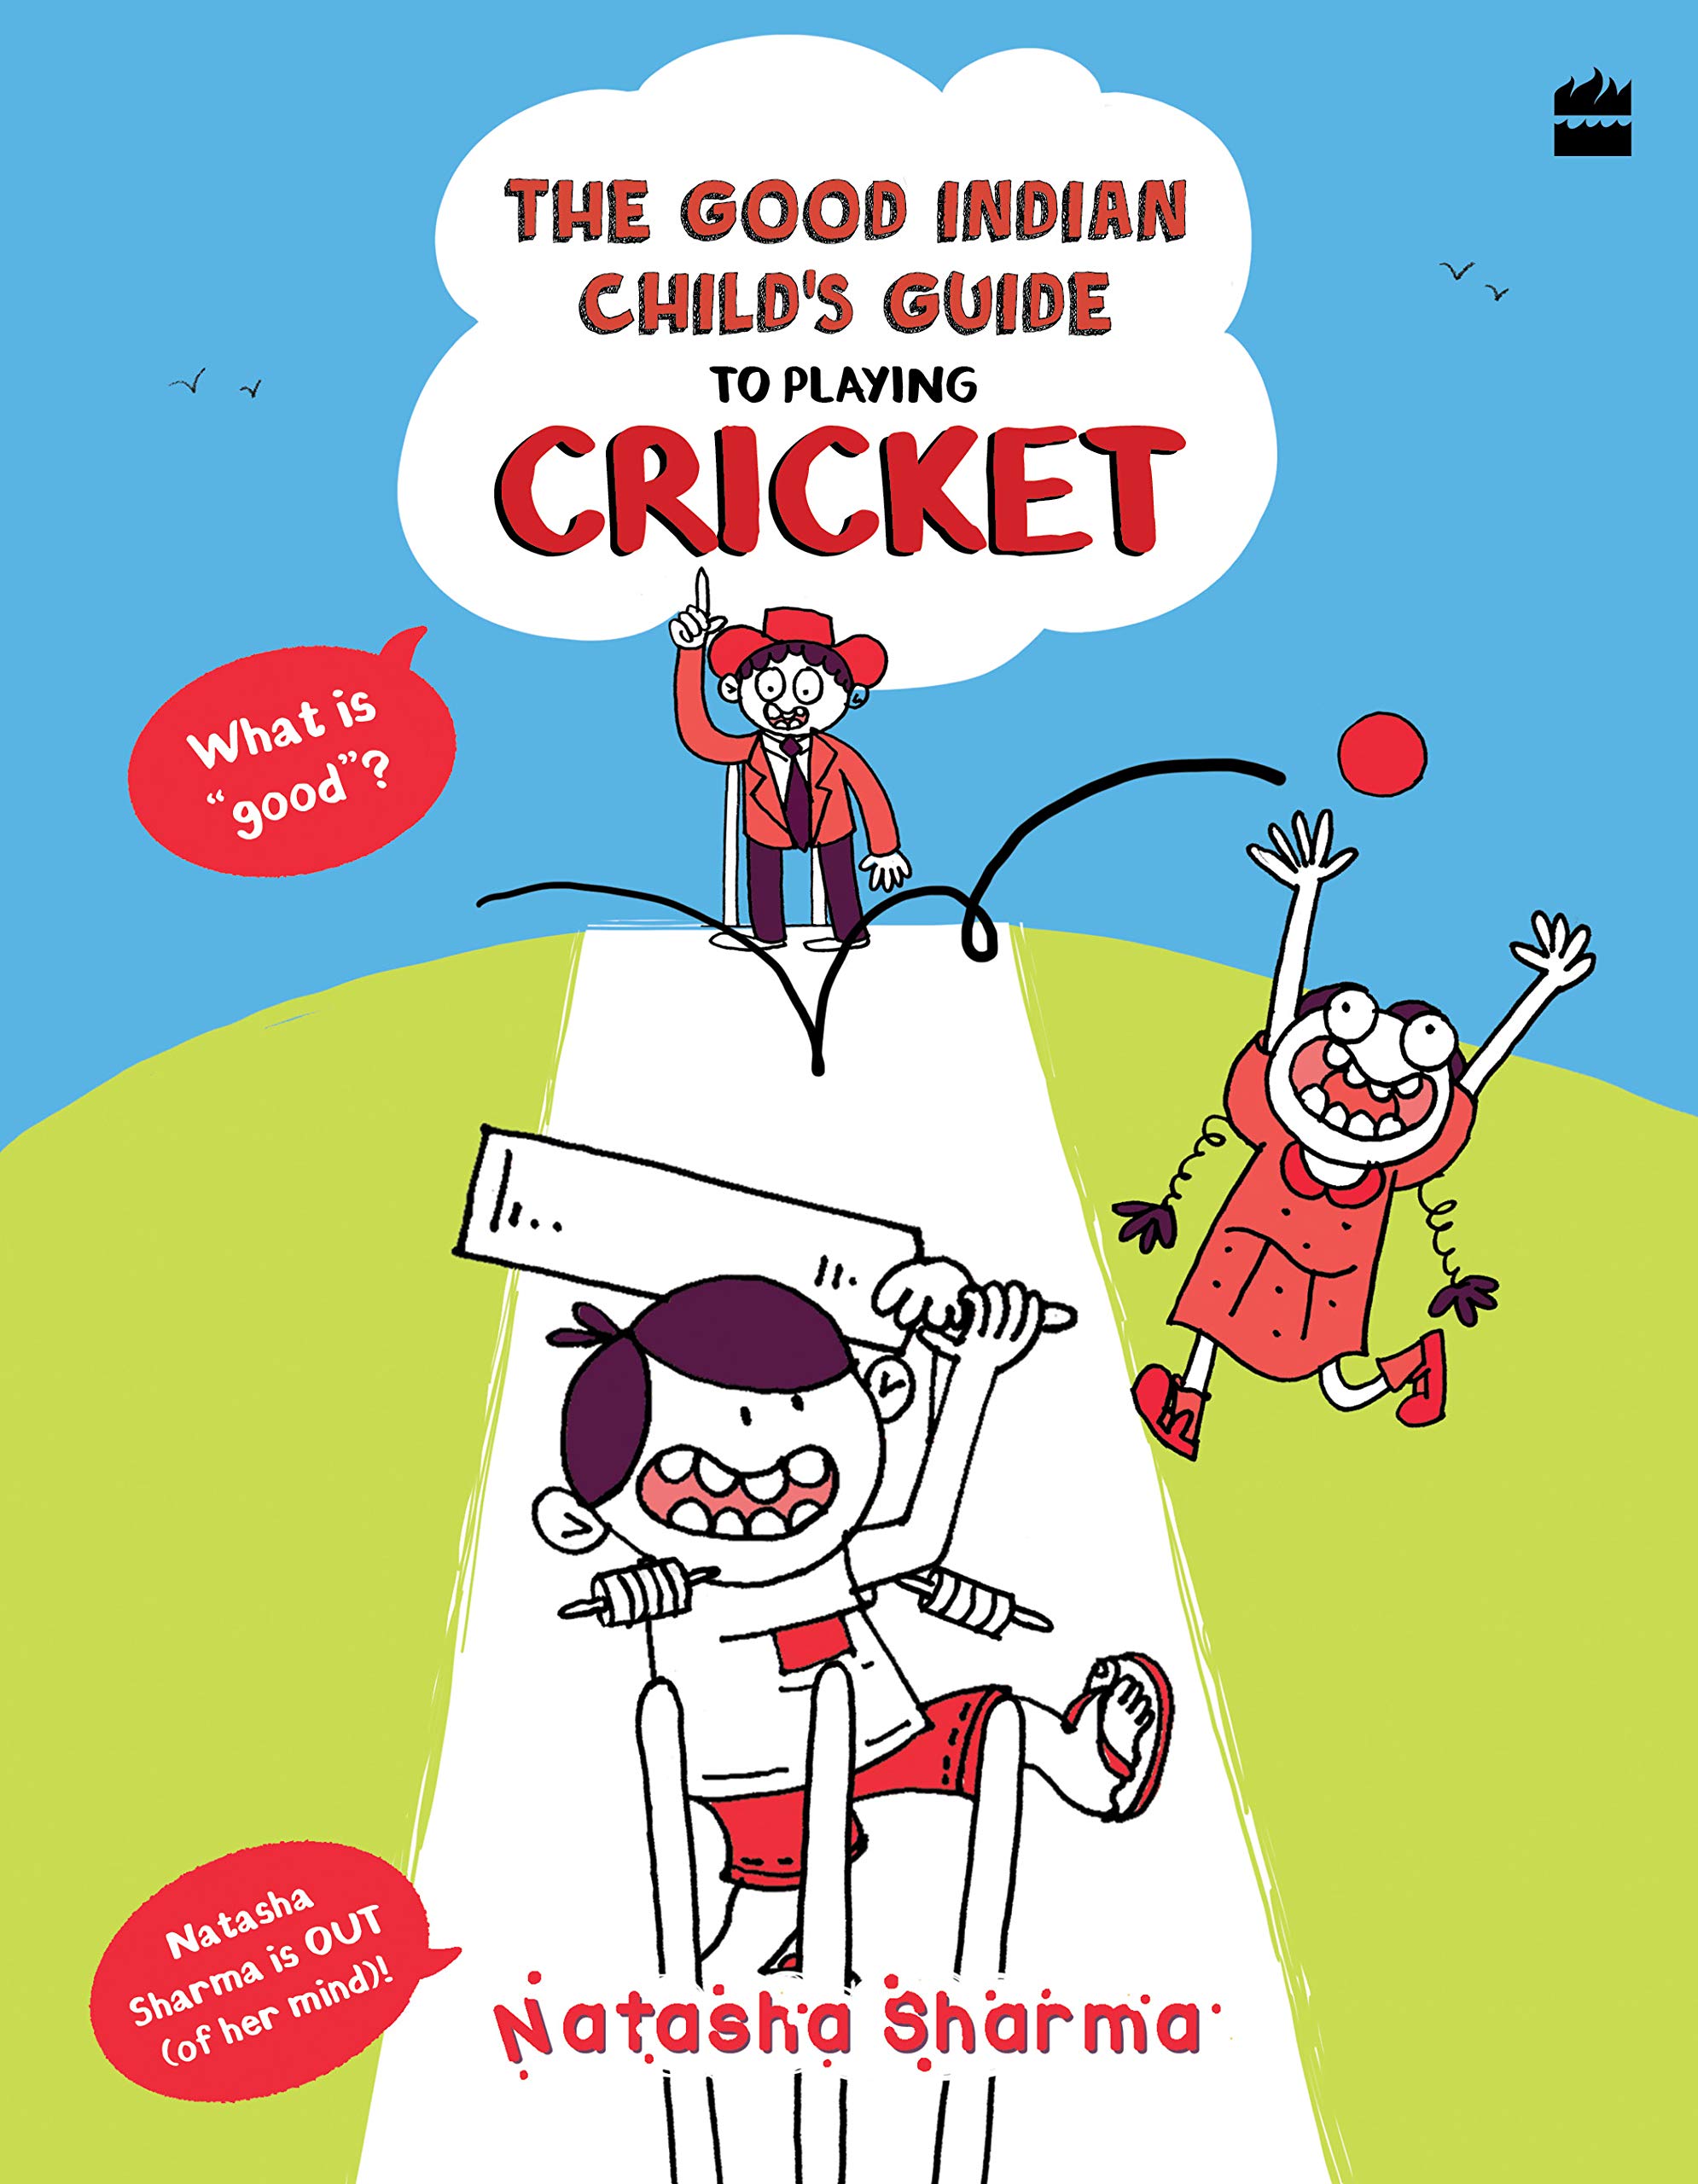 The Good Indian Child's Guide: To Playing Cricket by Natasha Sharma